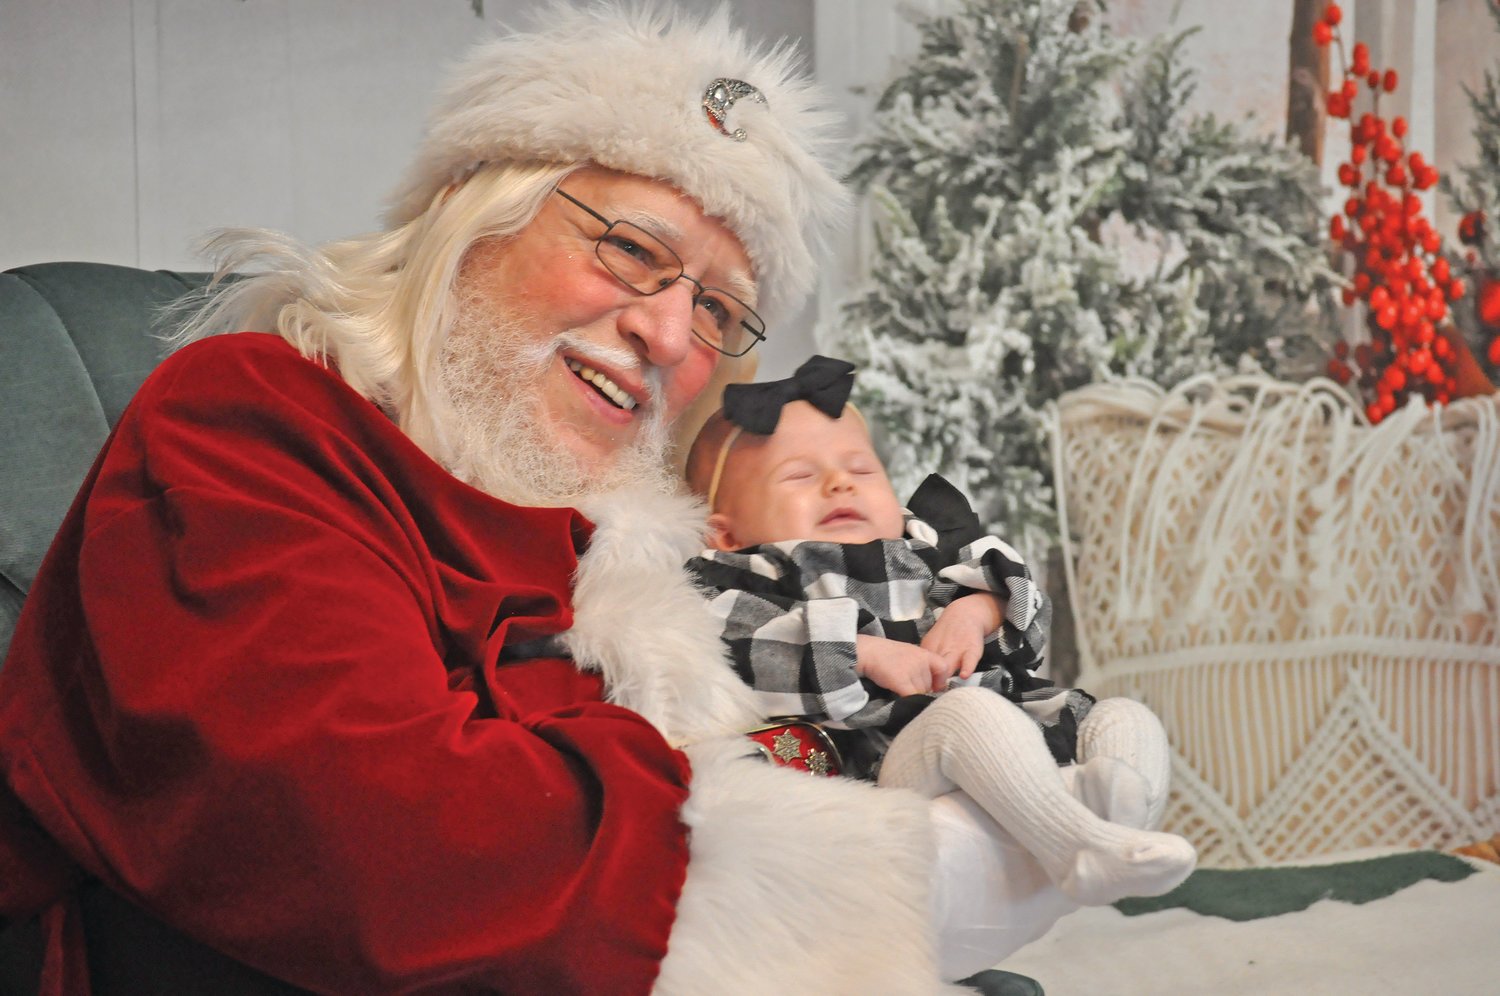 Santa Claus holds 2-month-old Emery Gwynn at The Santa Experience at Abbey Elaine Photography Saturday. The studio offered photos with Santa during Small Business Saturday and Downtown Party Night activities in downtown Crawfordsville.